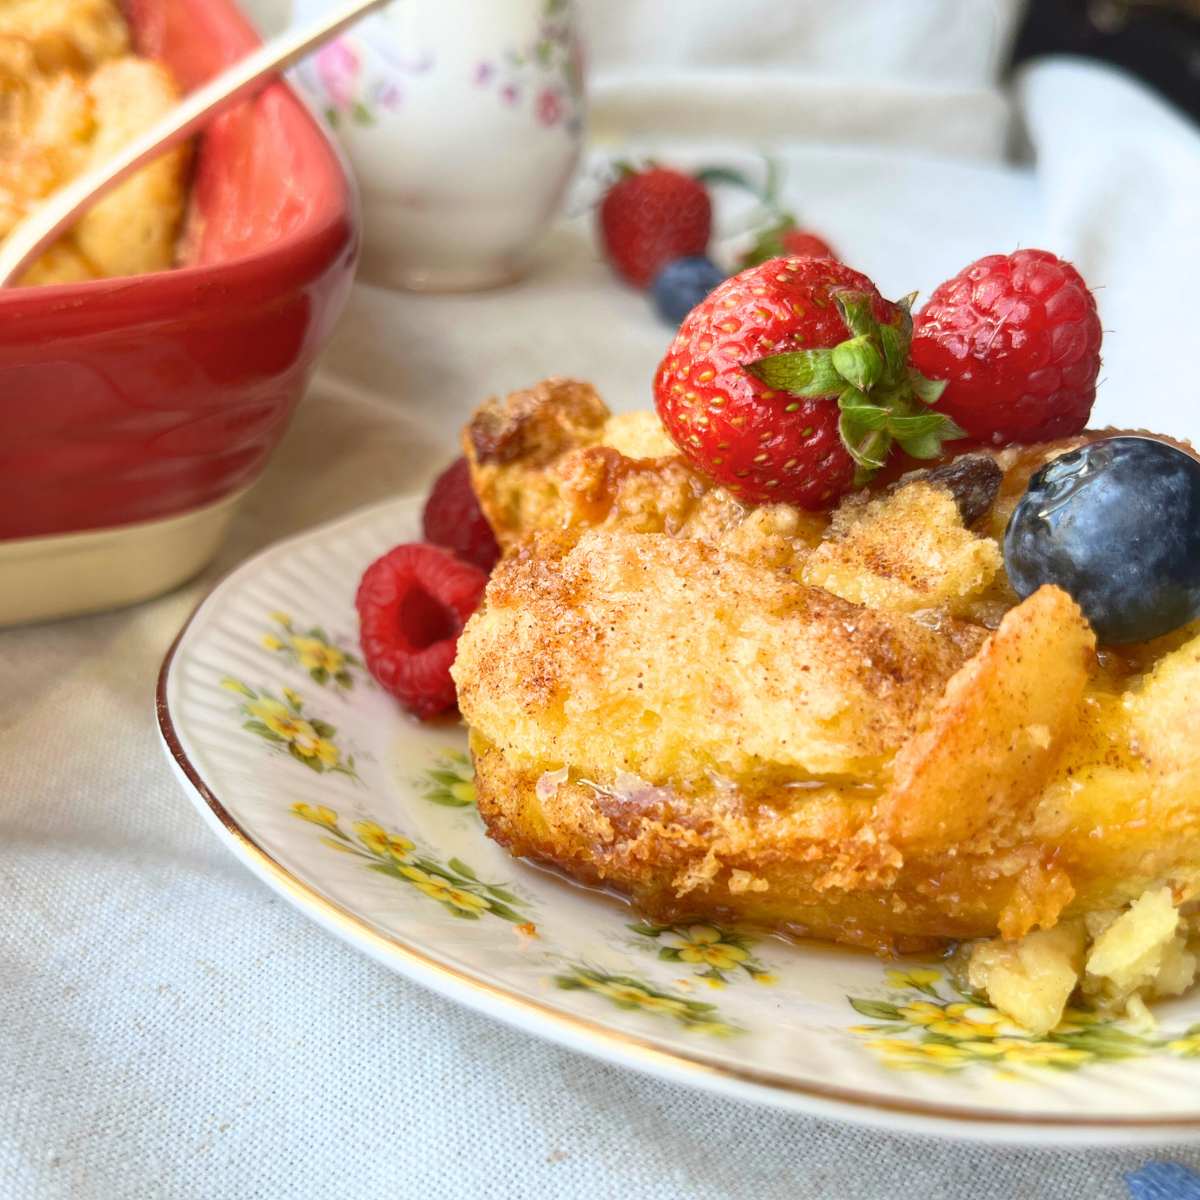 A breakfast casserole on a yellow floral plate with berries on top. The full casserole is in the background.